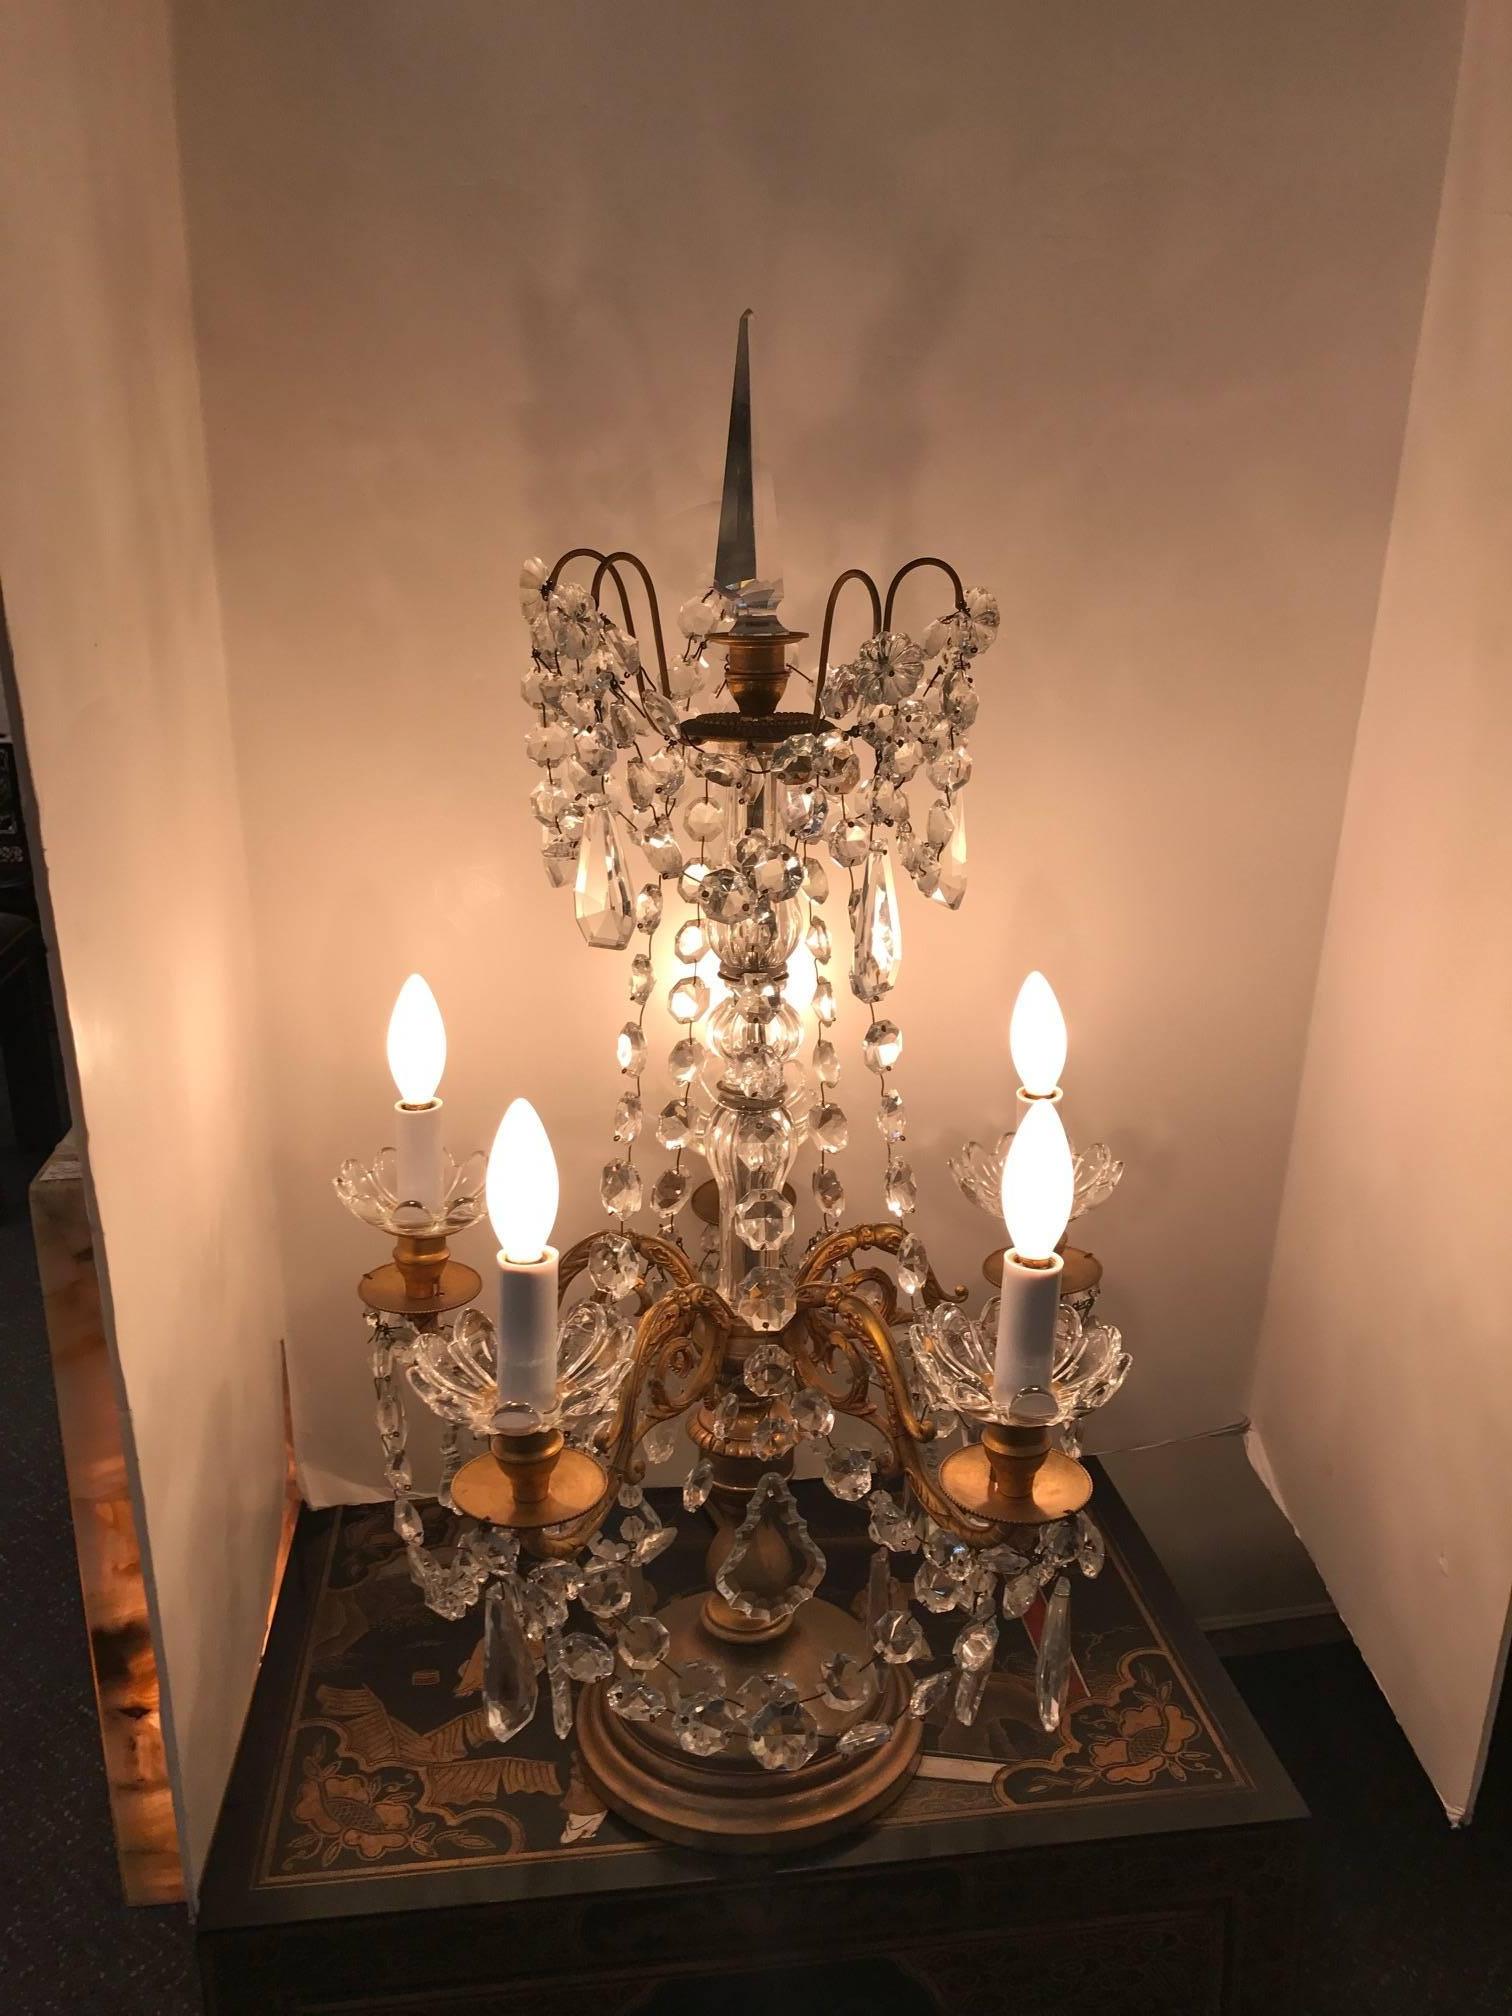 Elegant pair of French gilt bronze and crystal five-light girandole lamps. The top cut and polished spire supported by a molded glass and metal center column with five scrolling arms layered in draped cut-glass beading. On-off switch on cord.